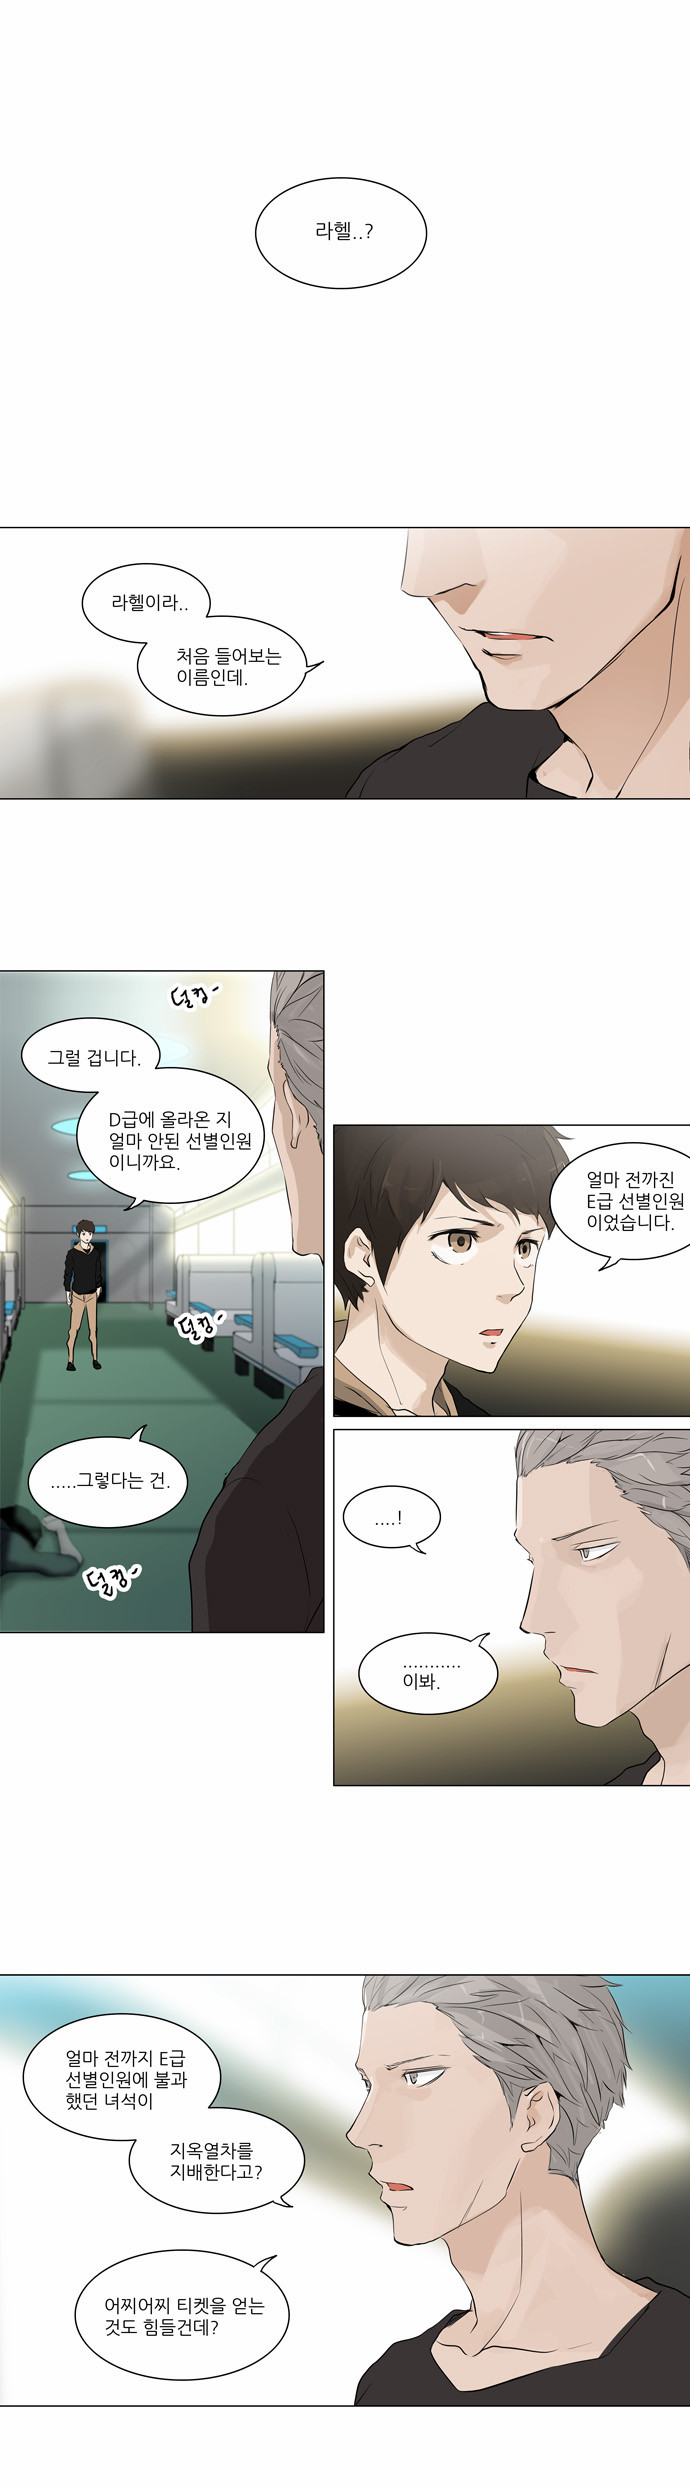 Tower of God - Chapter 200 - Page 1